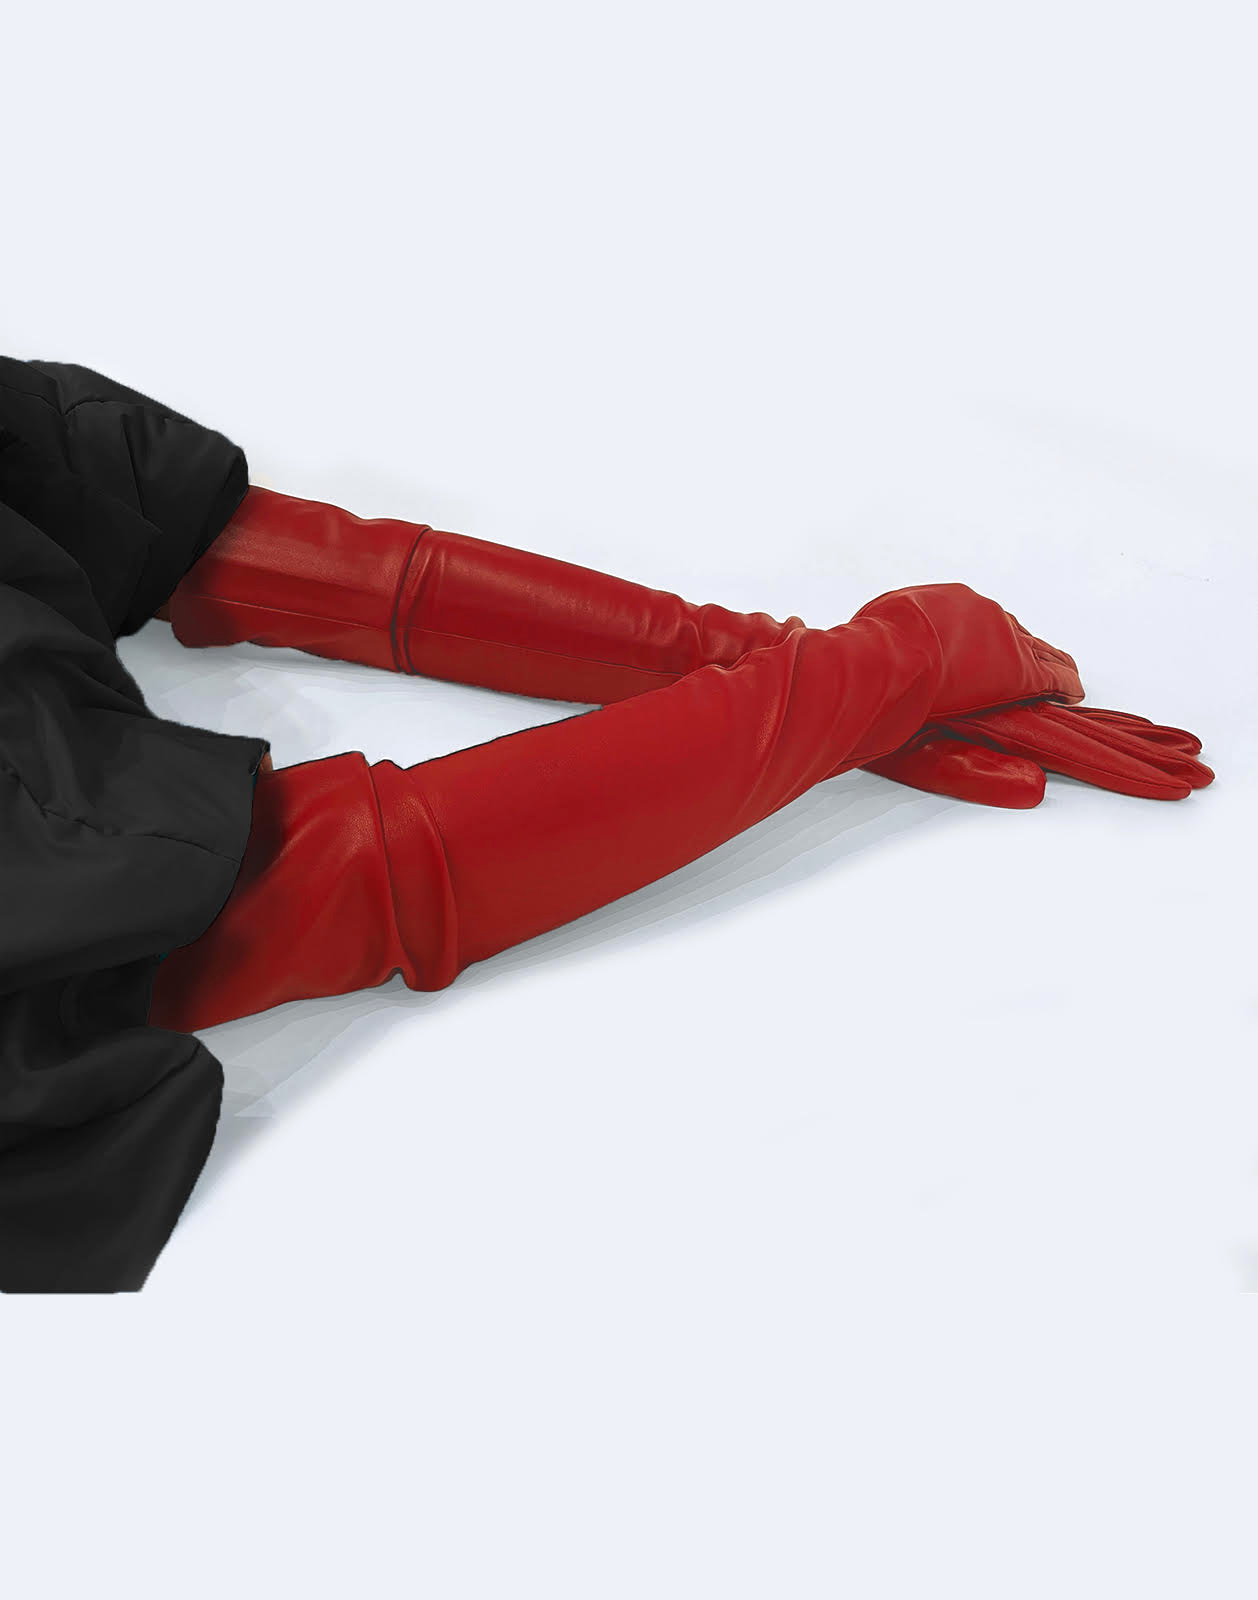 Bea Long Leather Gloves